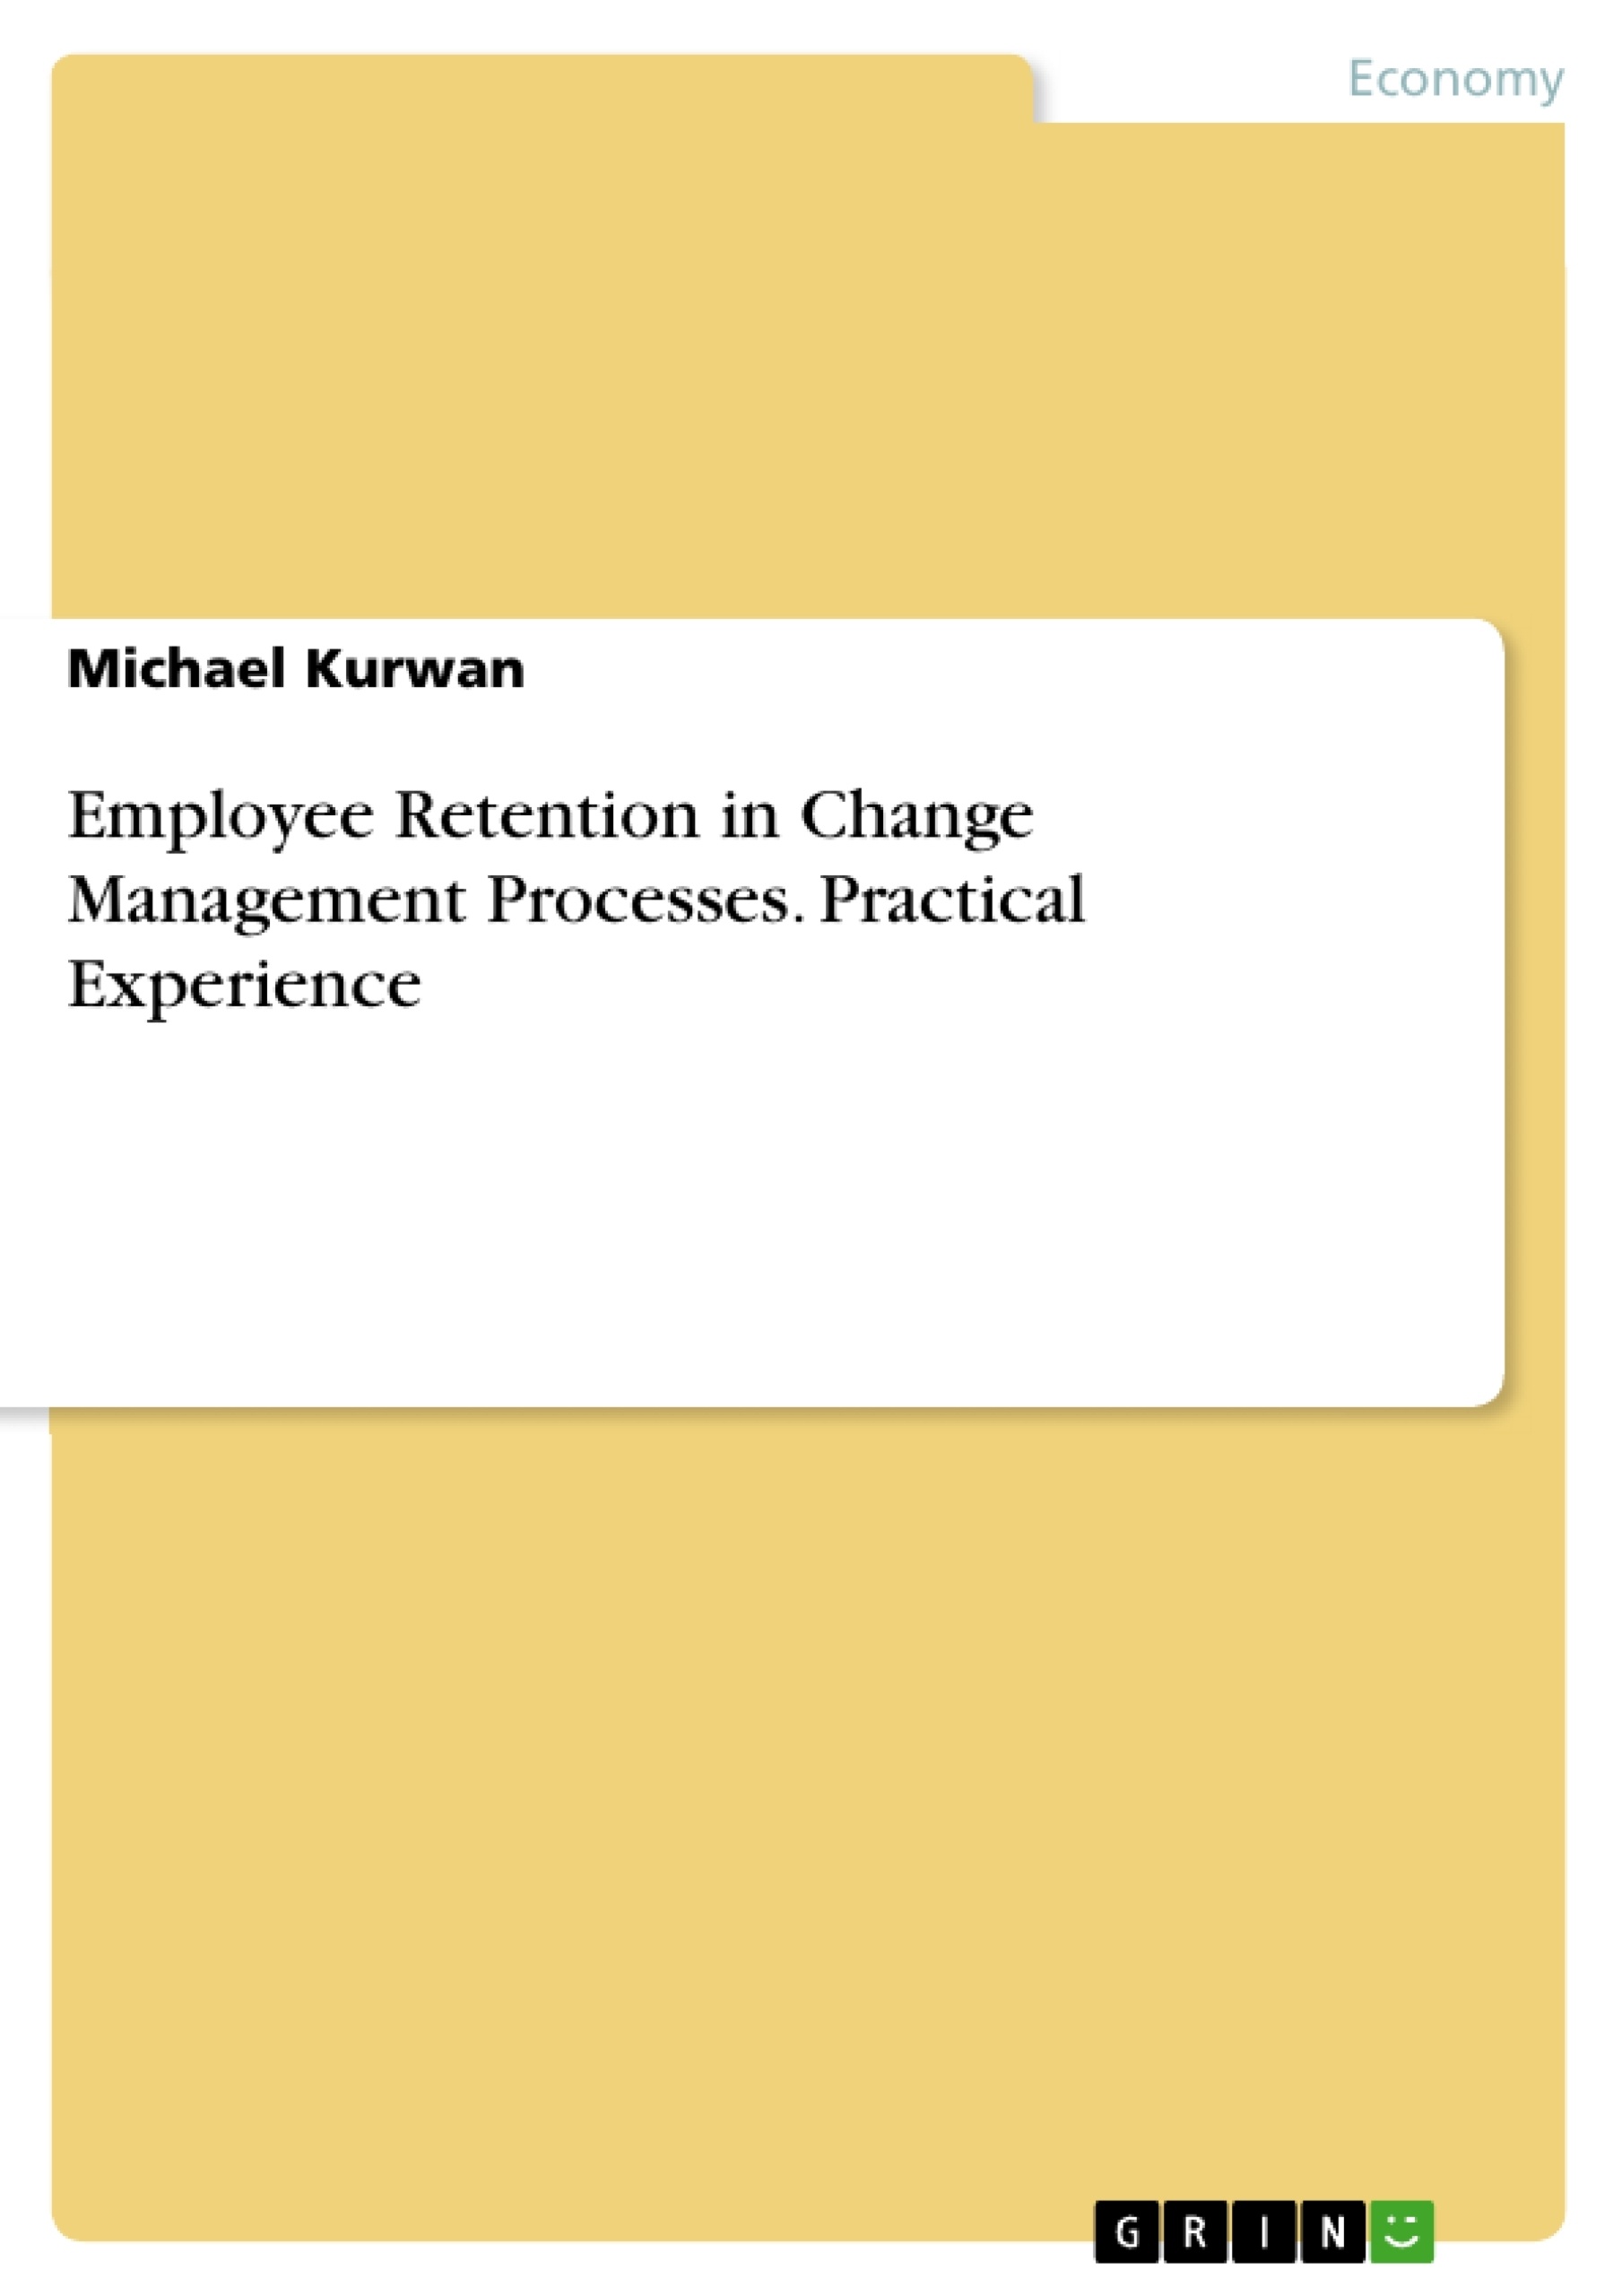 Title: Employee Retention in Change Management Processes. Practical Experience